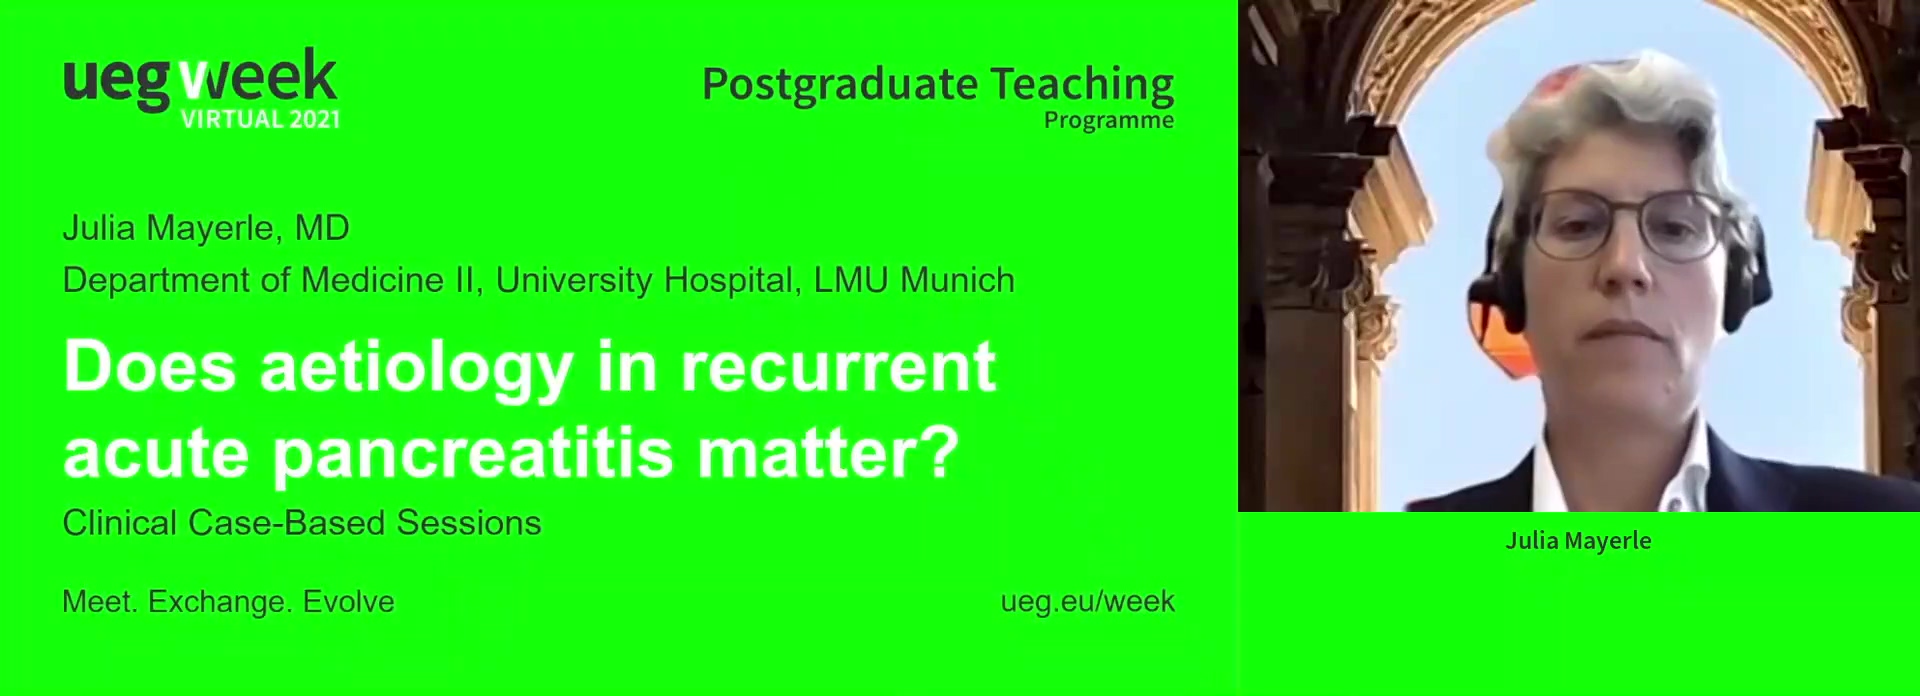 Does aetiology in recurrent acute pancreatitis matter for further management?